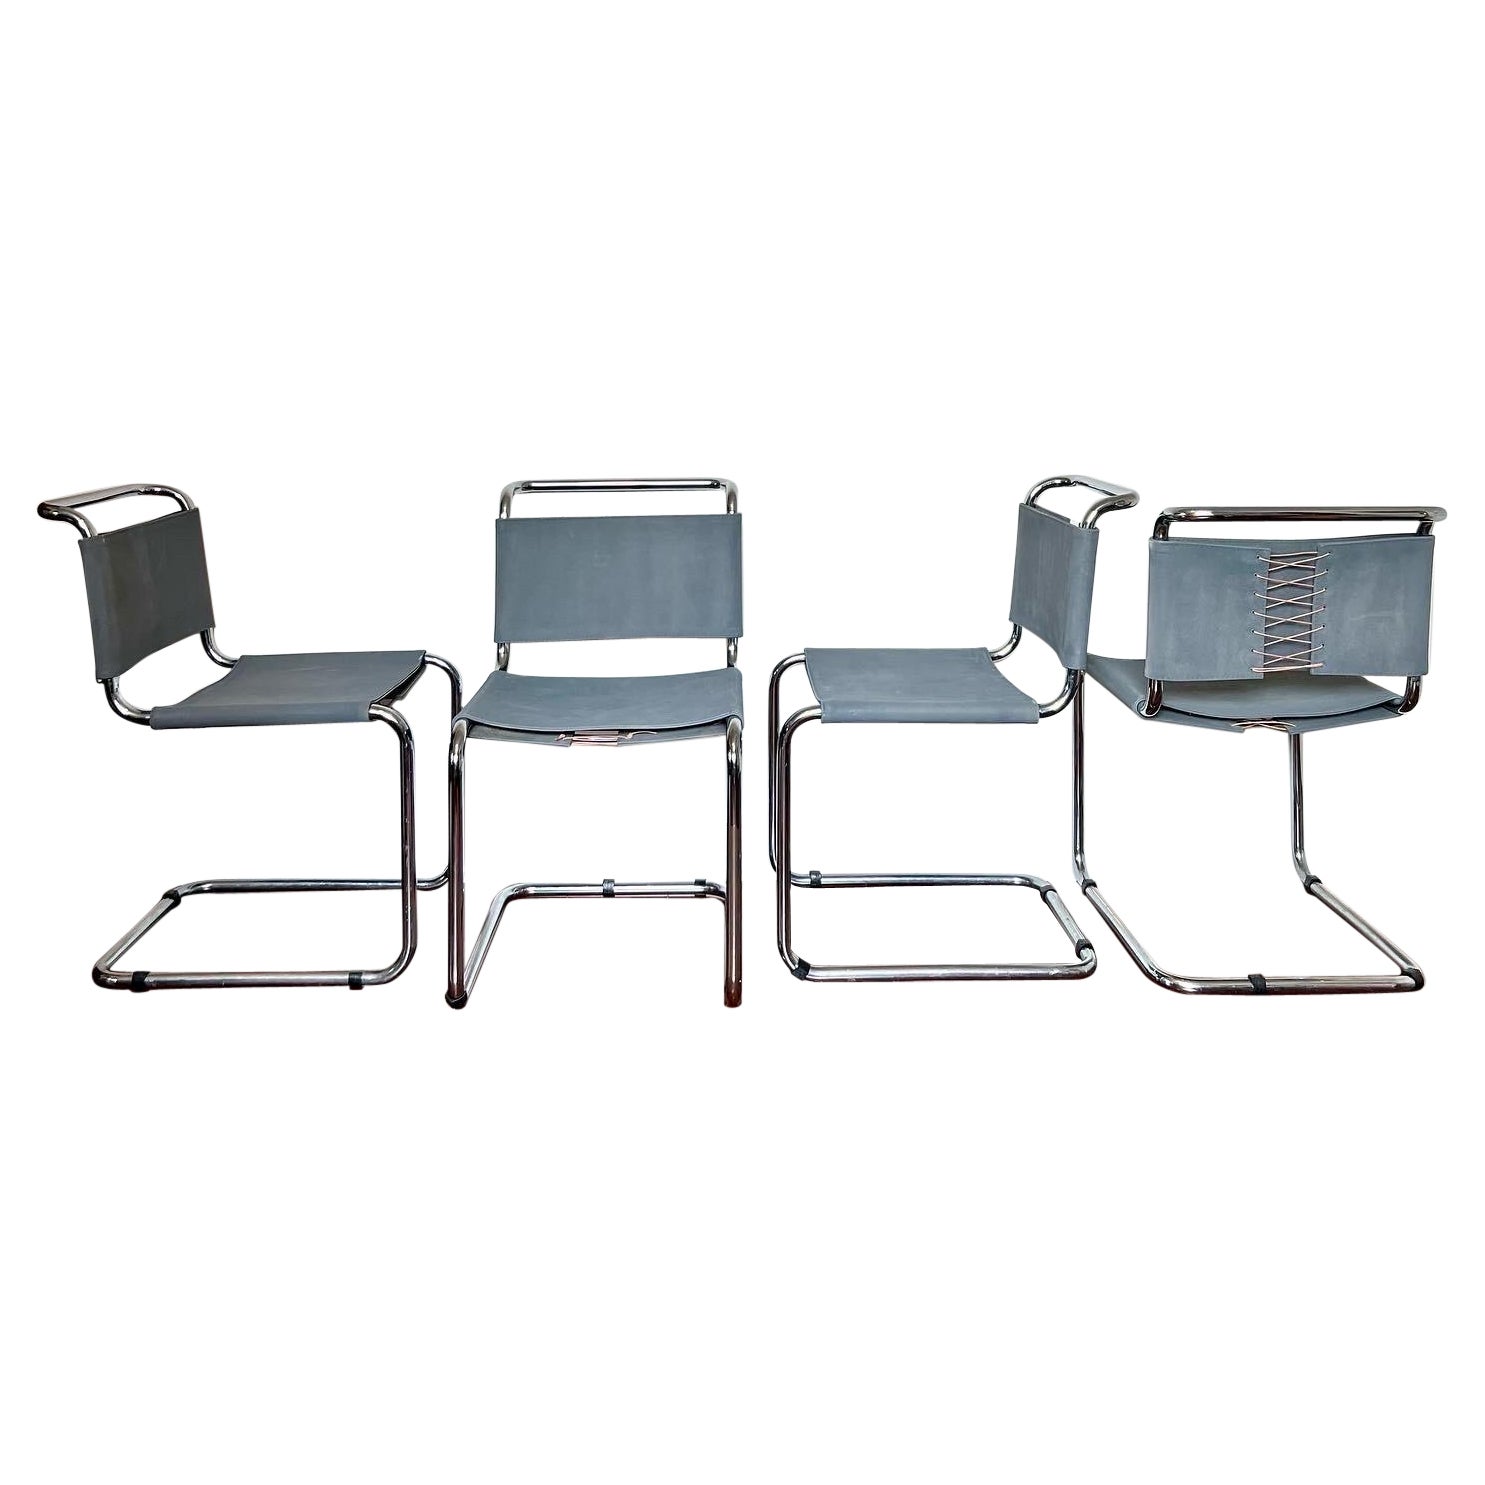 A set of 4 Marcel Breuer B33 dining chairs by Gavina from the 1950s